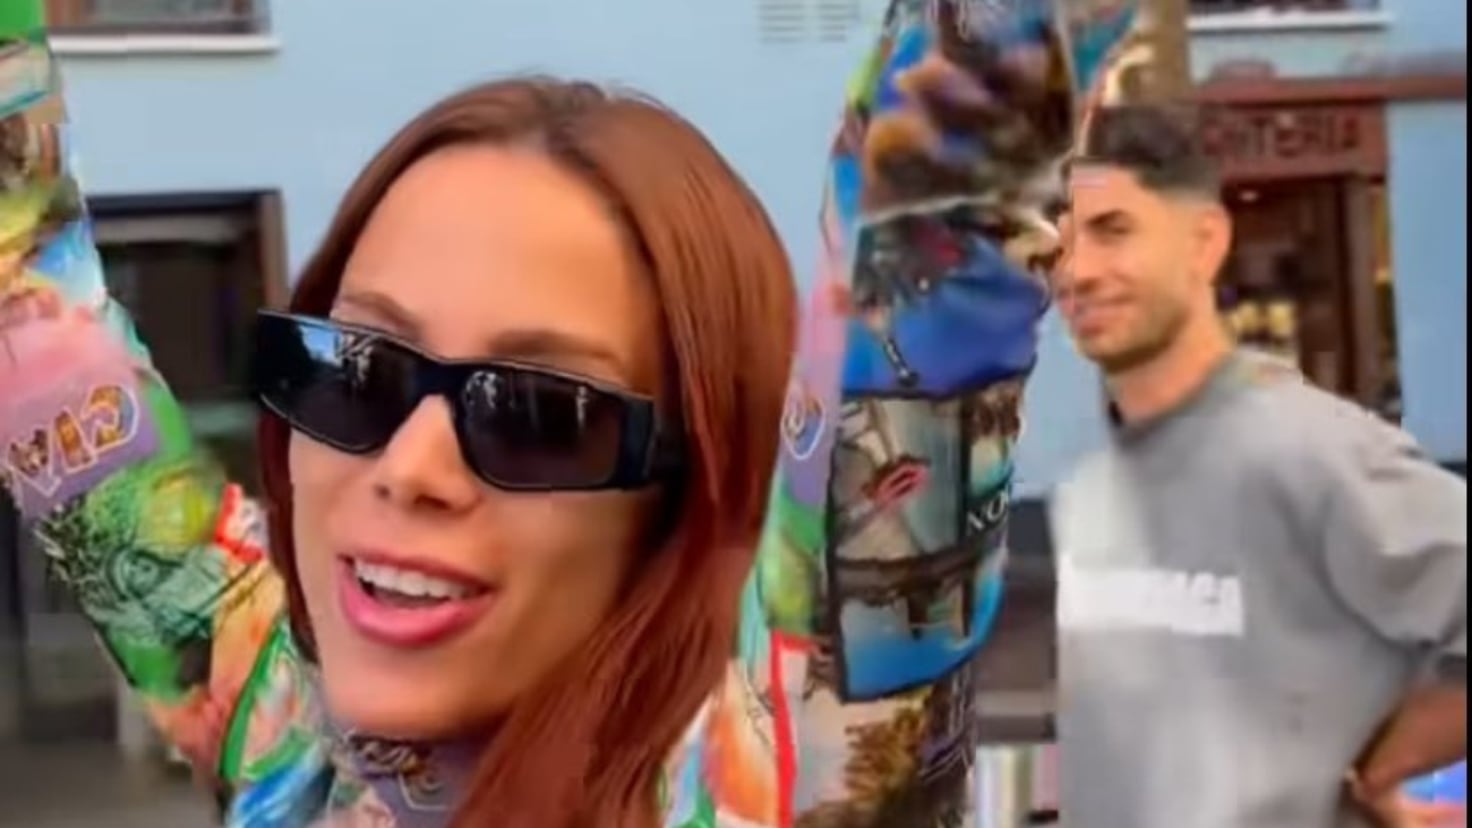 Anitta and Ayoze Prez, together through the streets of Seville
